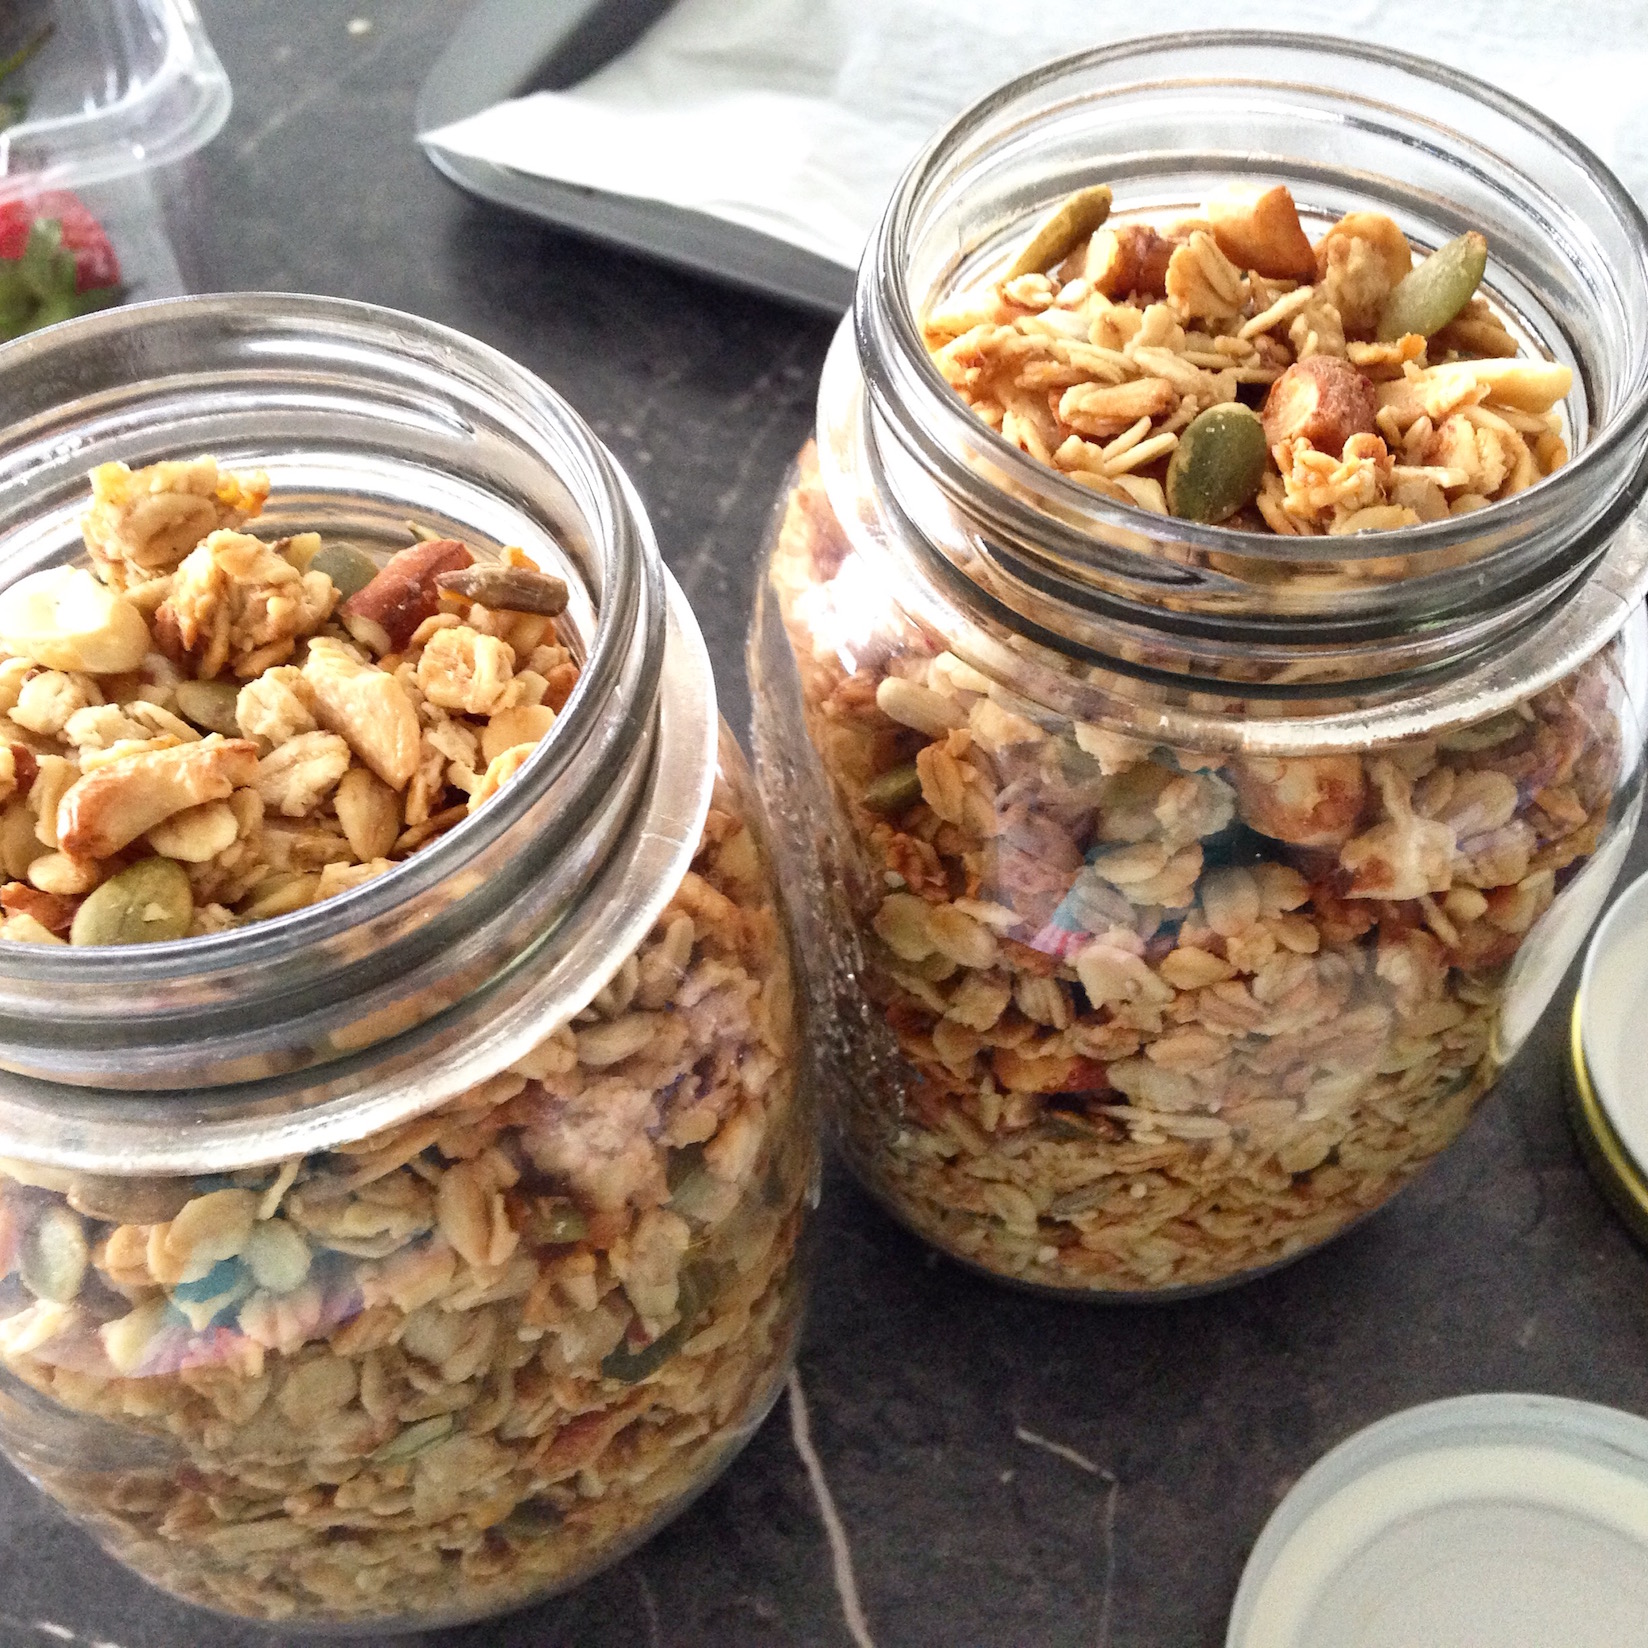 Banana muesli is a healthy and delicious topping for your yoghurt bowl